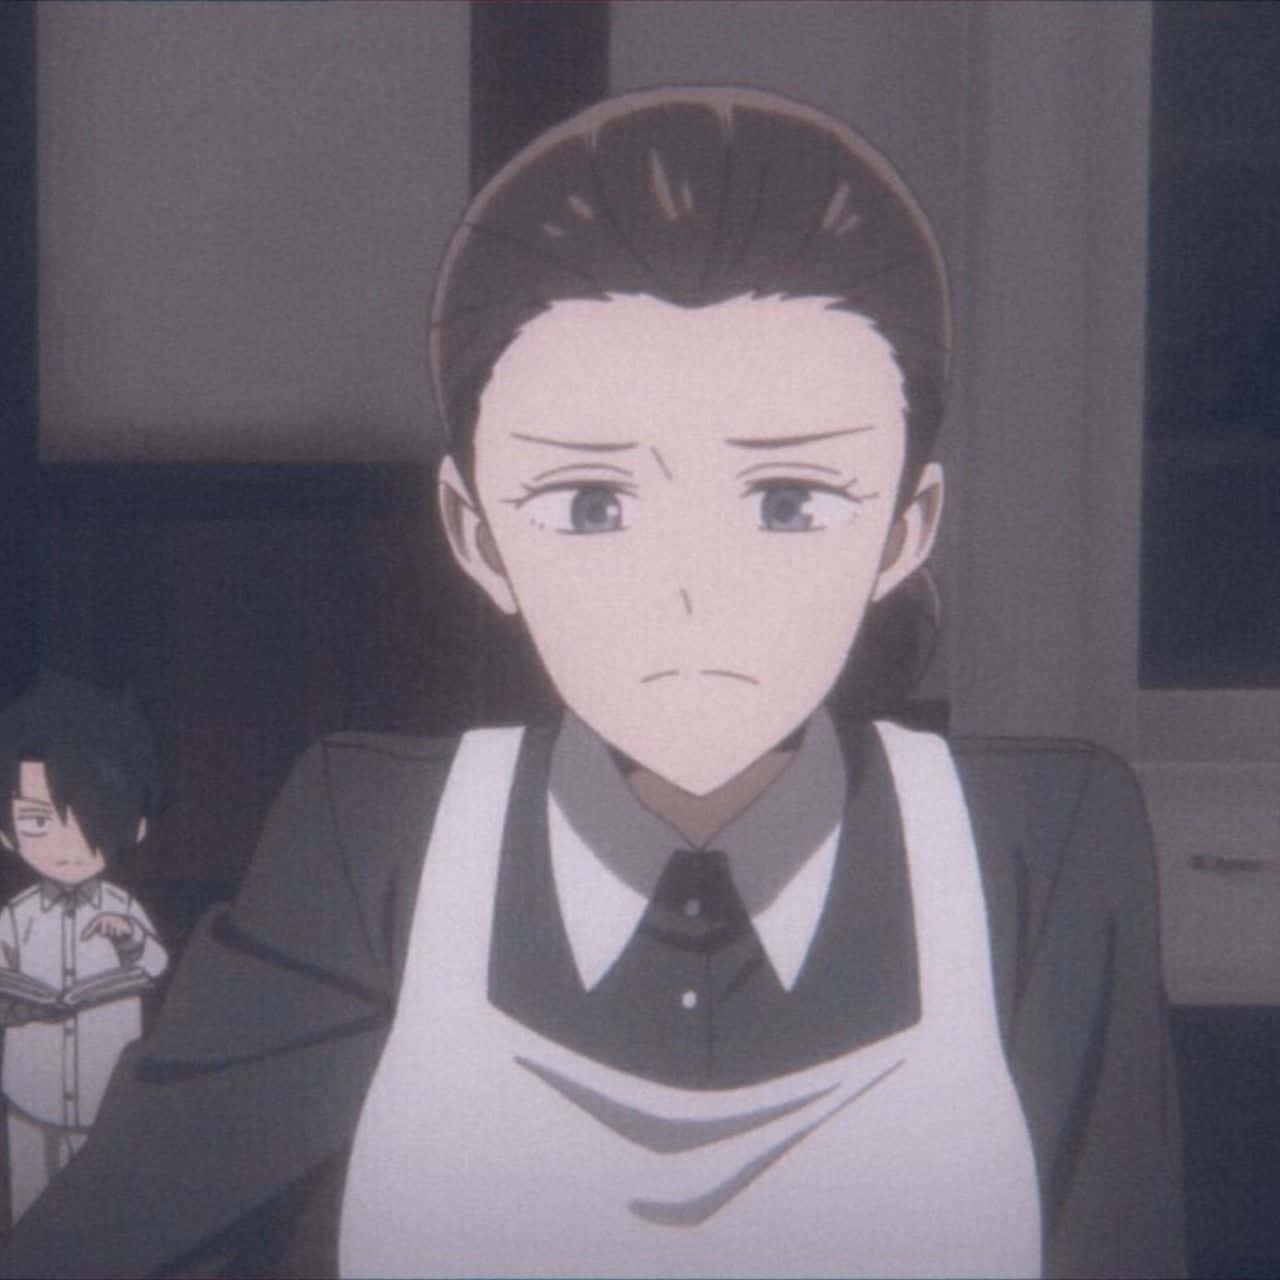 Isabella, the enigmatic caretaker from The Promised Neverland Wallpaper